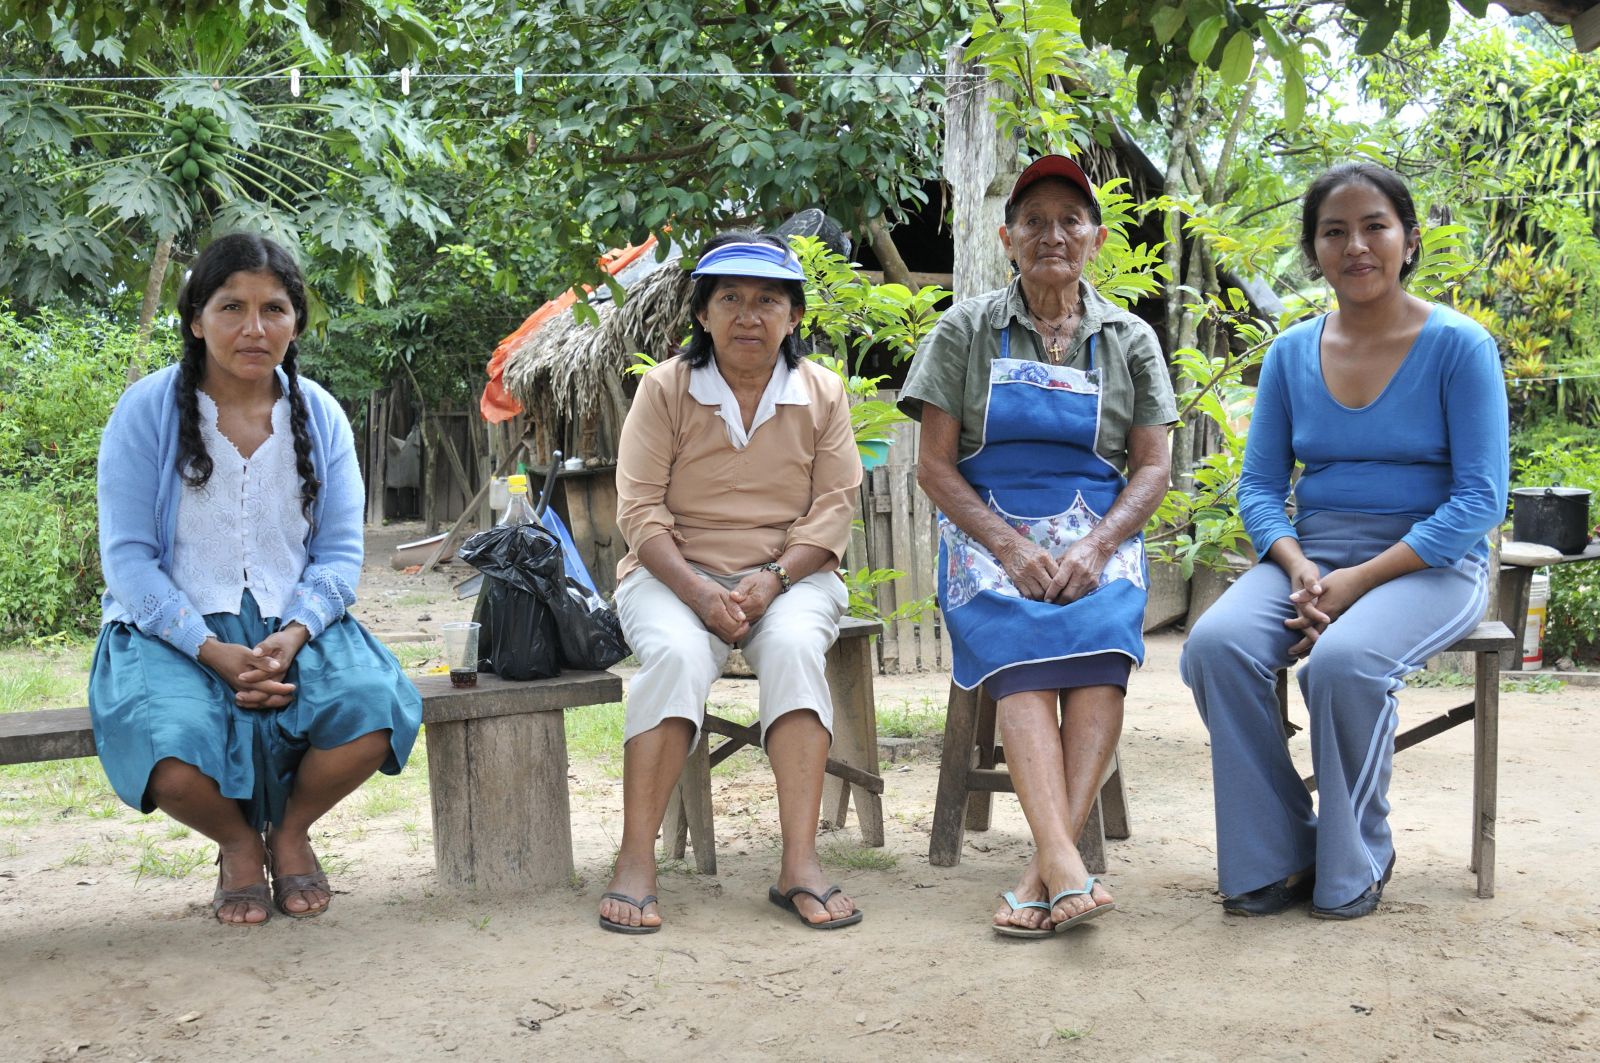 Emancipating women in Bolivia to overcome gender-based violence and discrimination.